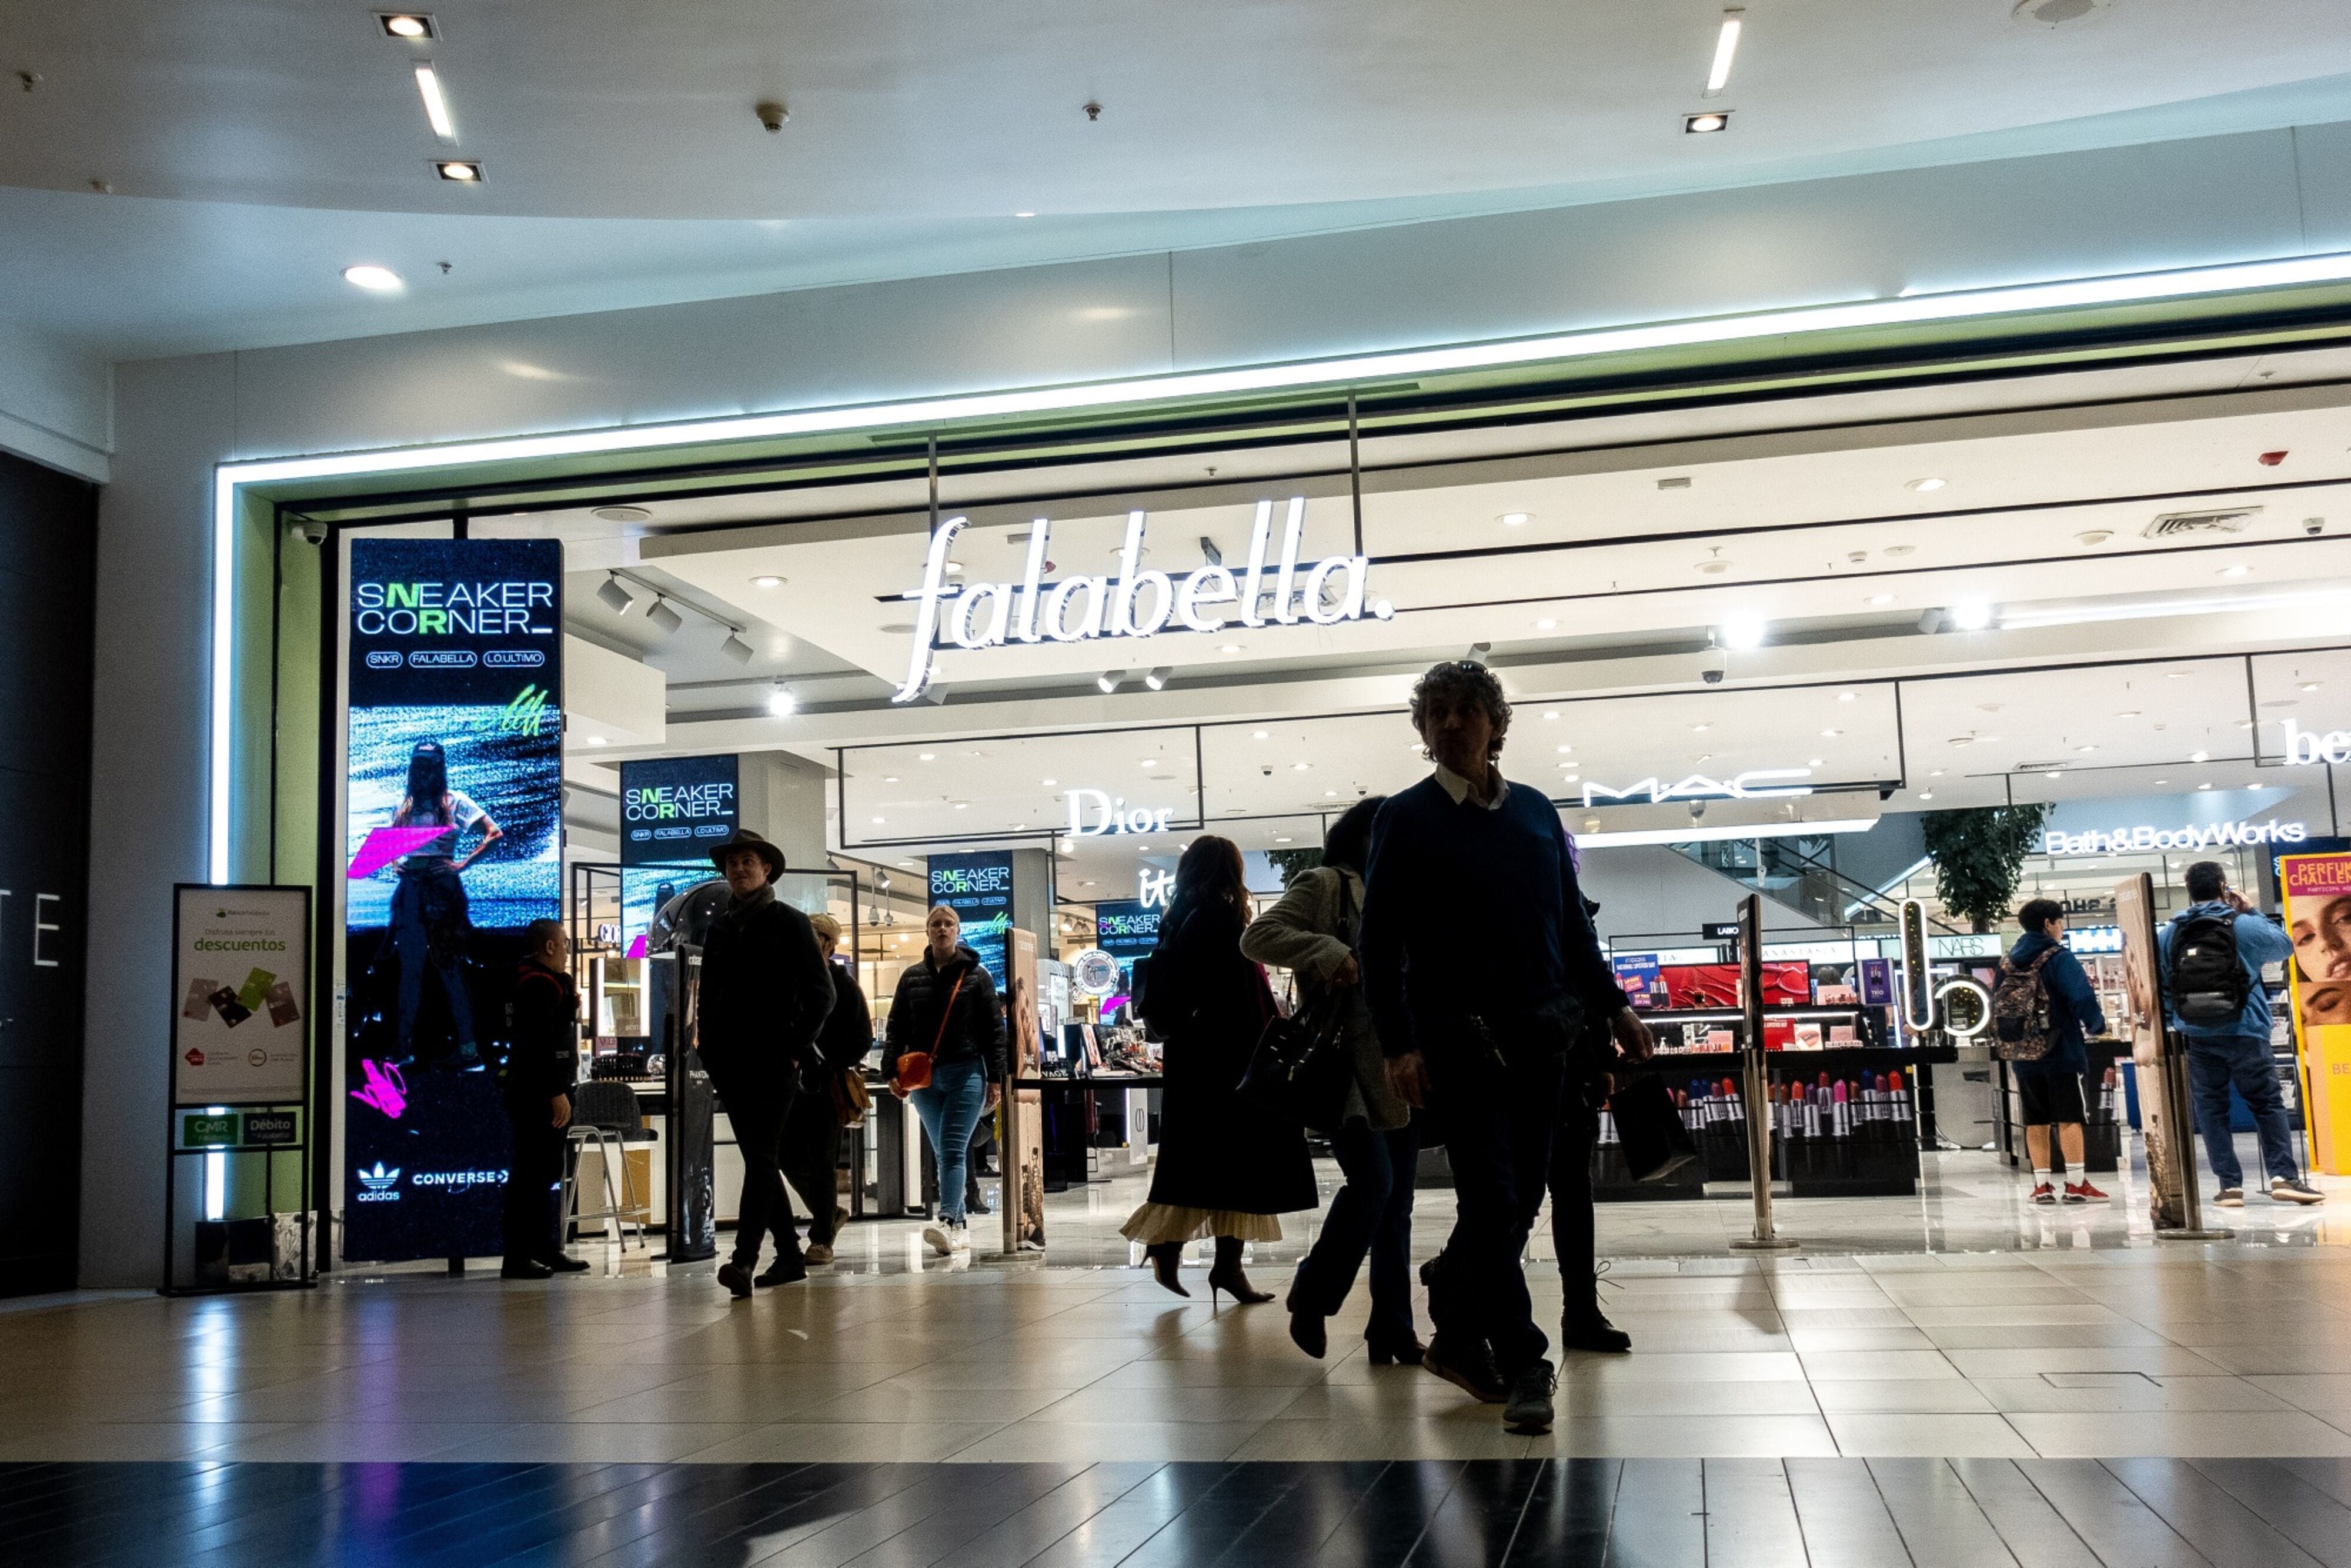 Chile's Falabella Struggles to Keep Up With MercadoLibre